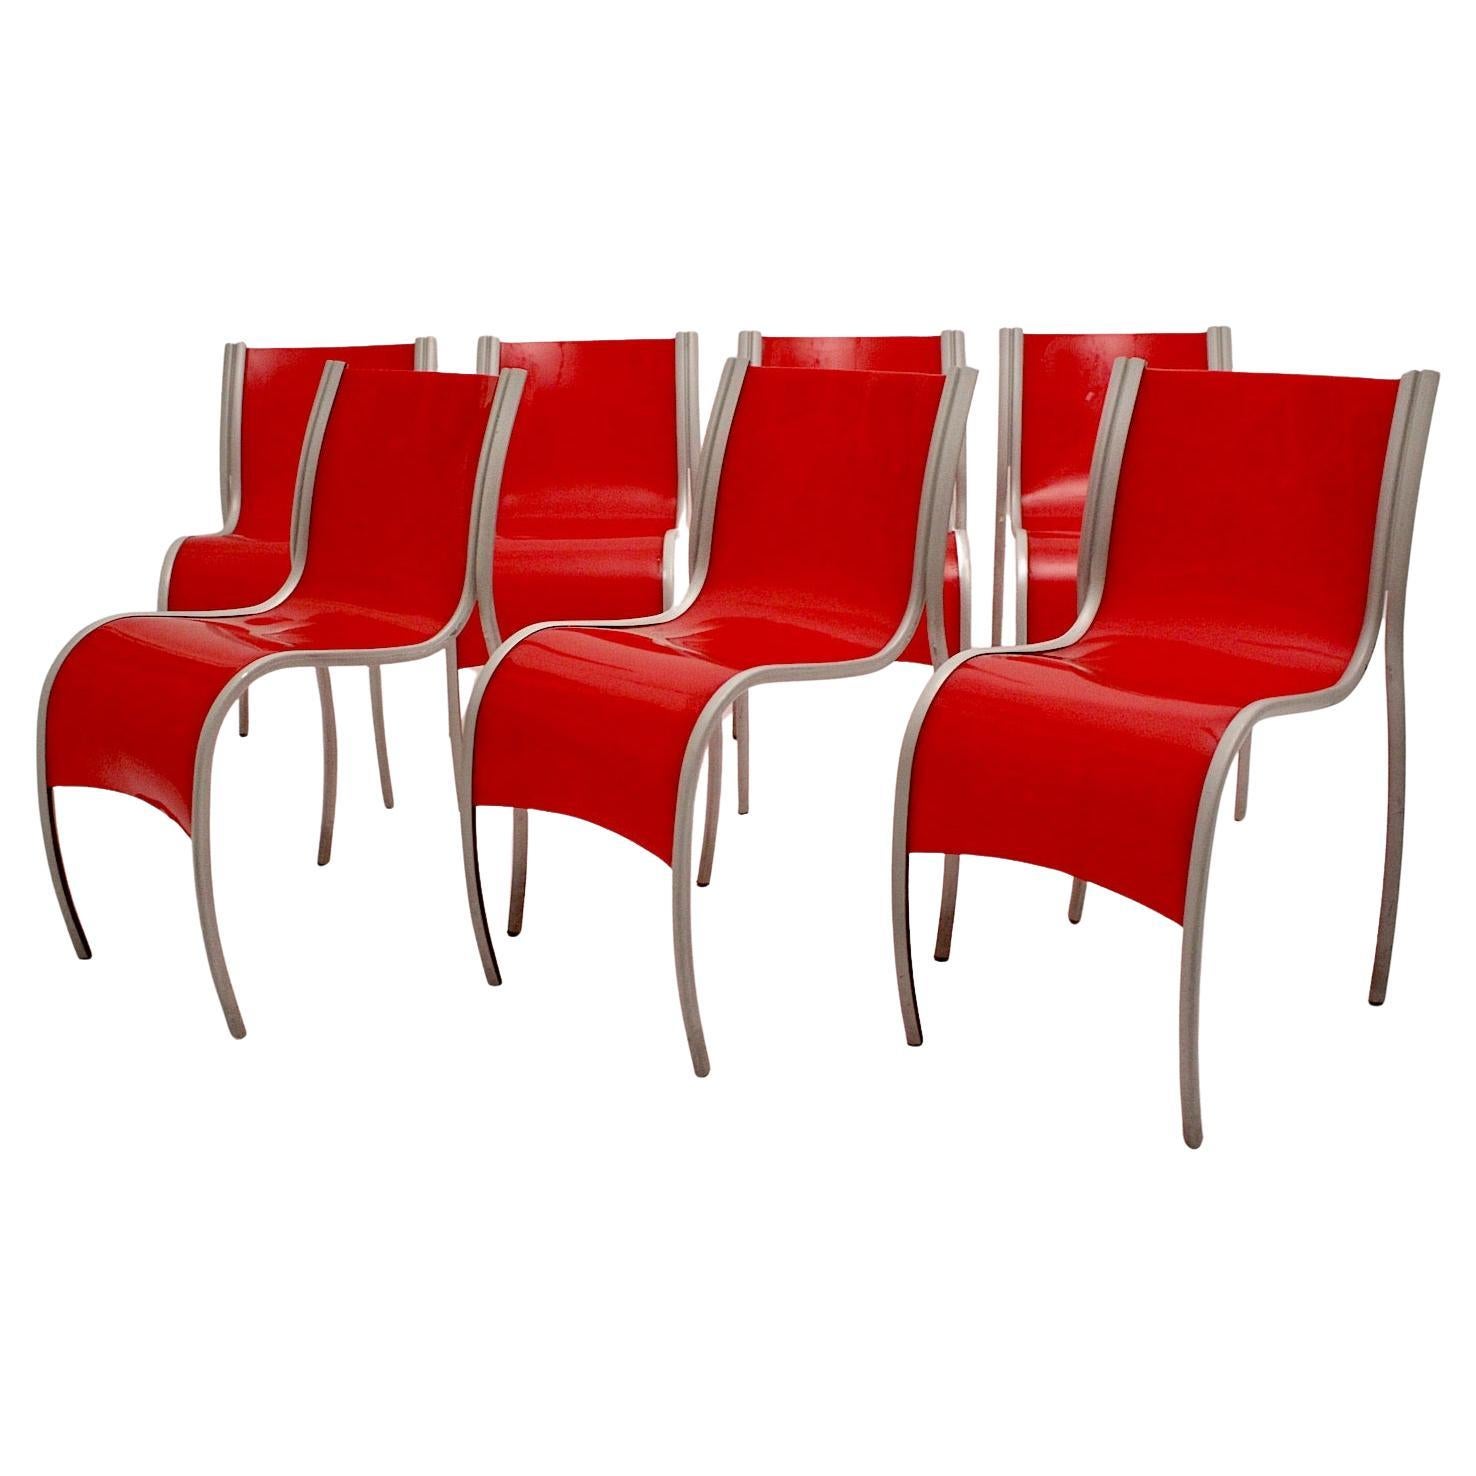 Modern Red Plastic Vintage Seven Dining Chairs Ron Arad for Kartell  1999 Italy For Sale